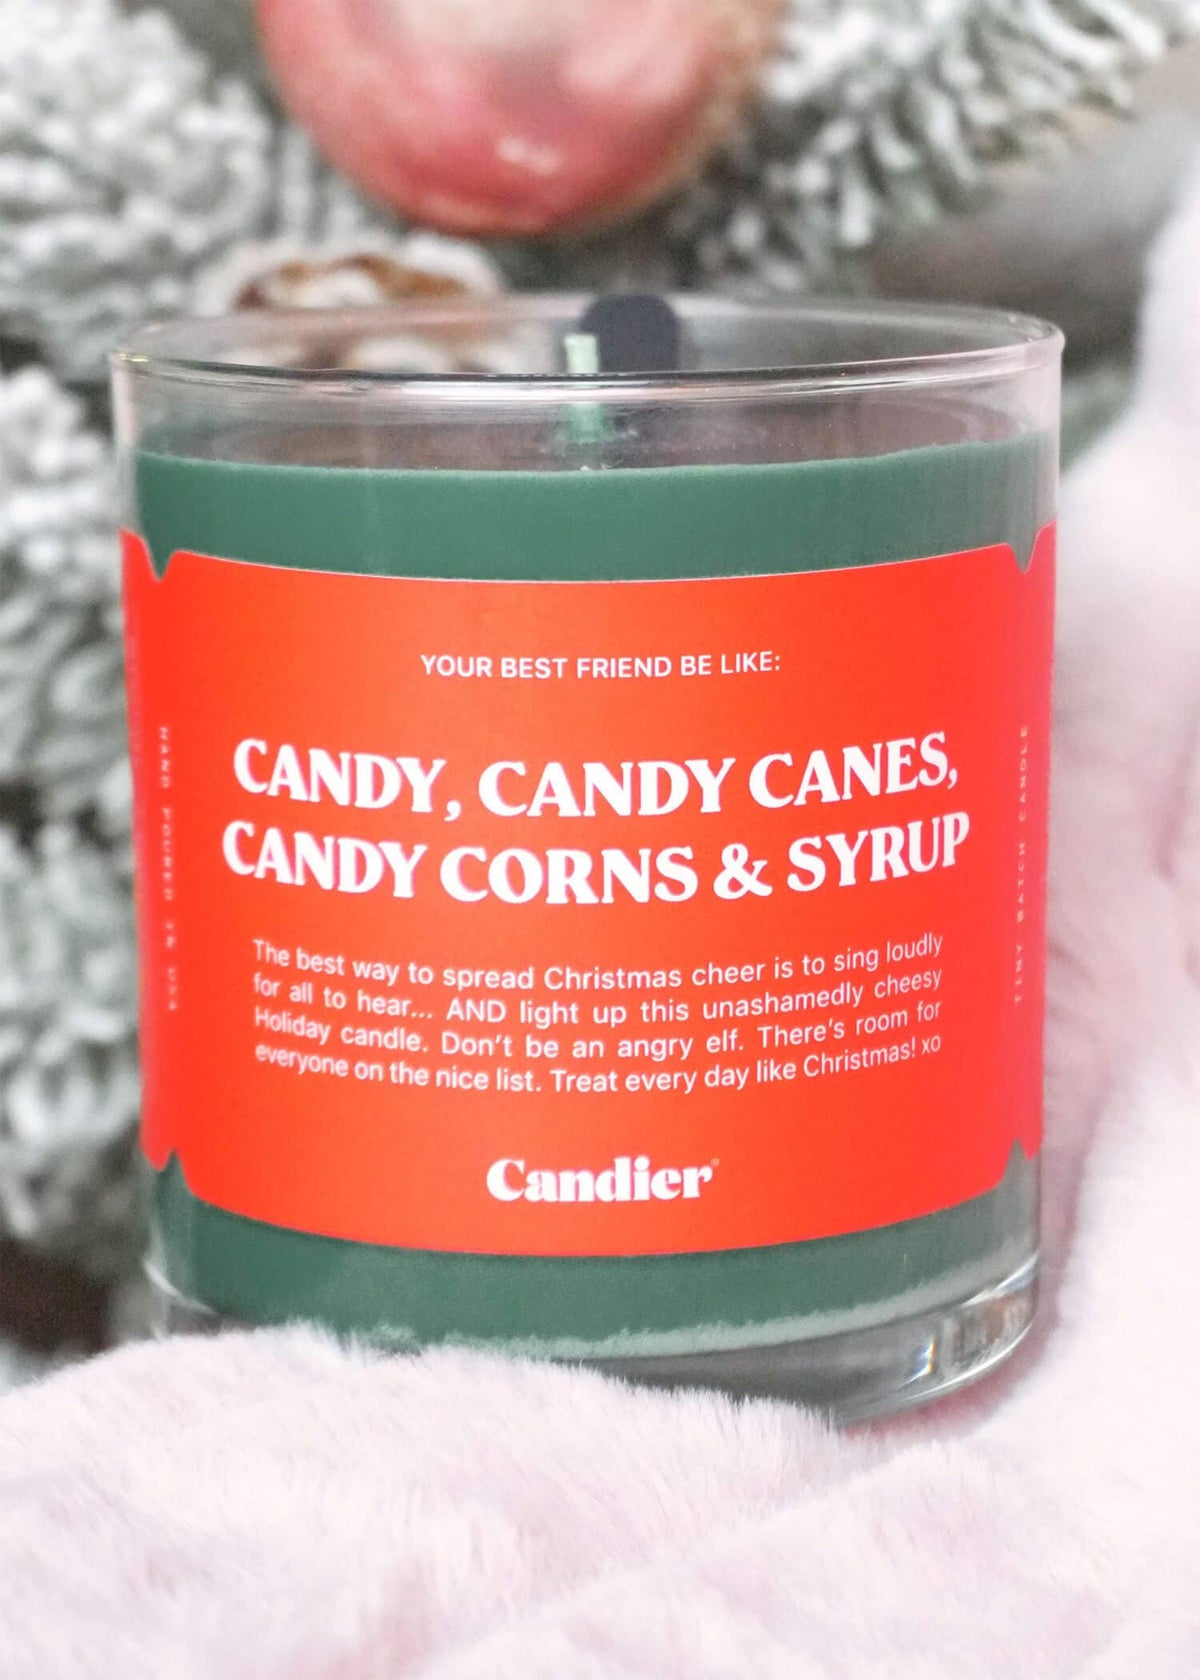 Candy, Candy Canes, Candy Corns & Syrup Candle Candles MerciGrace Boutique.